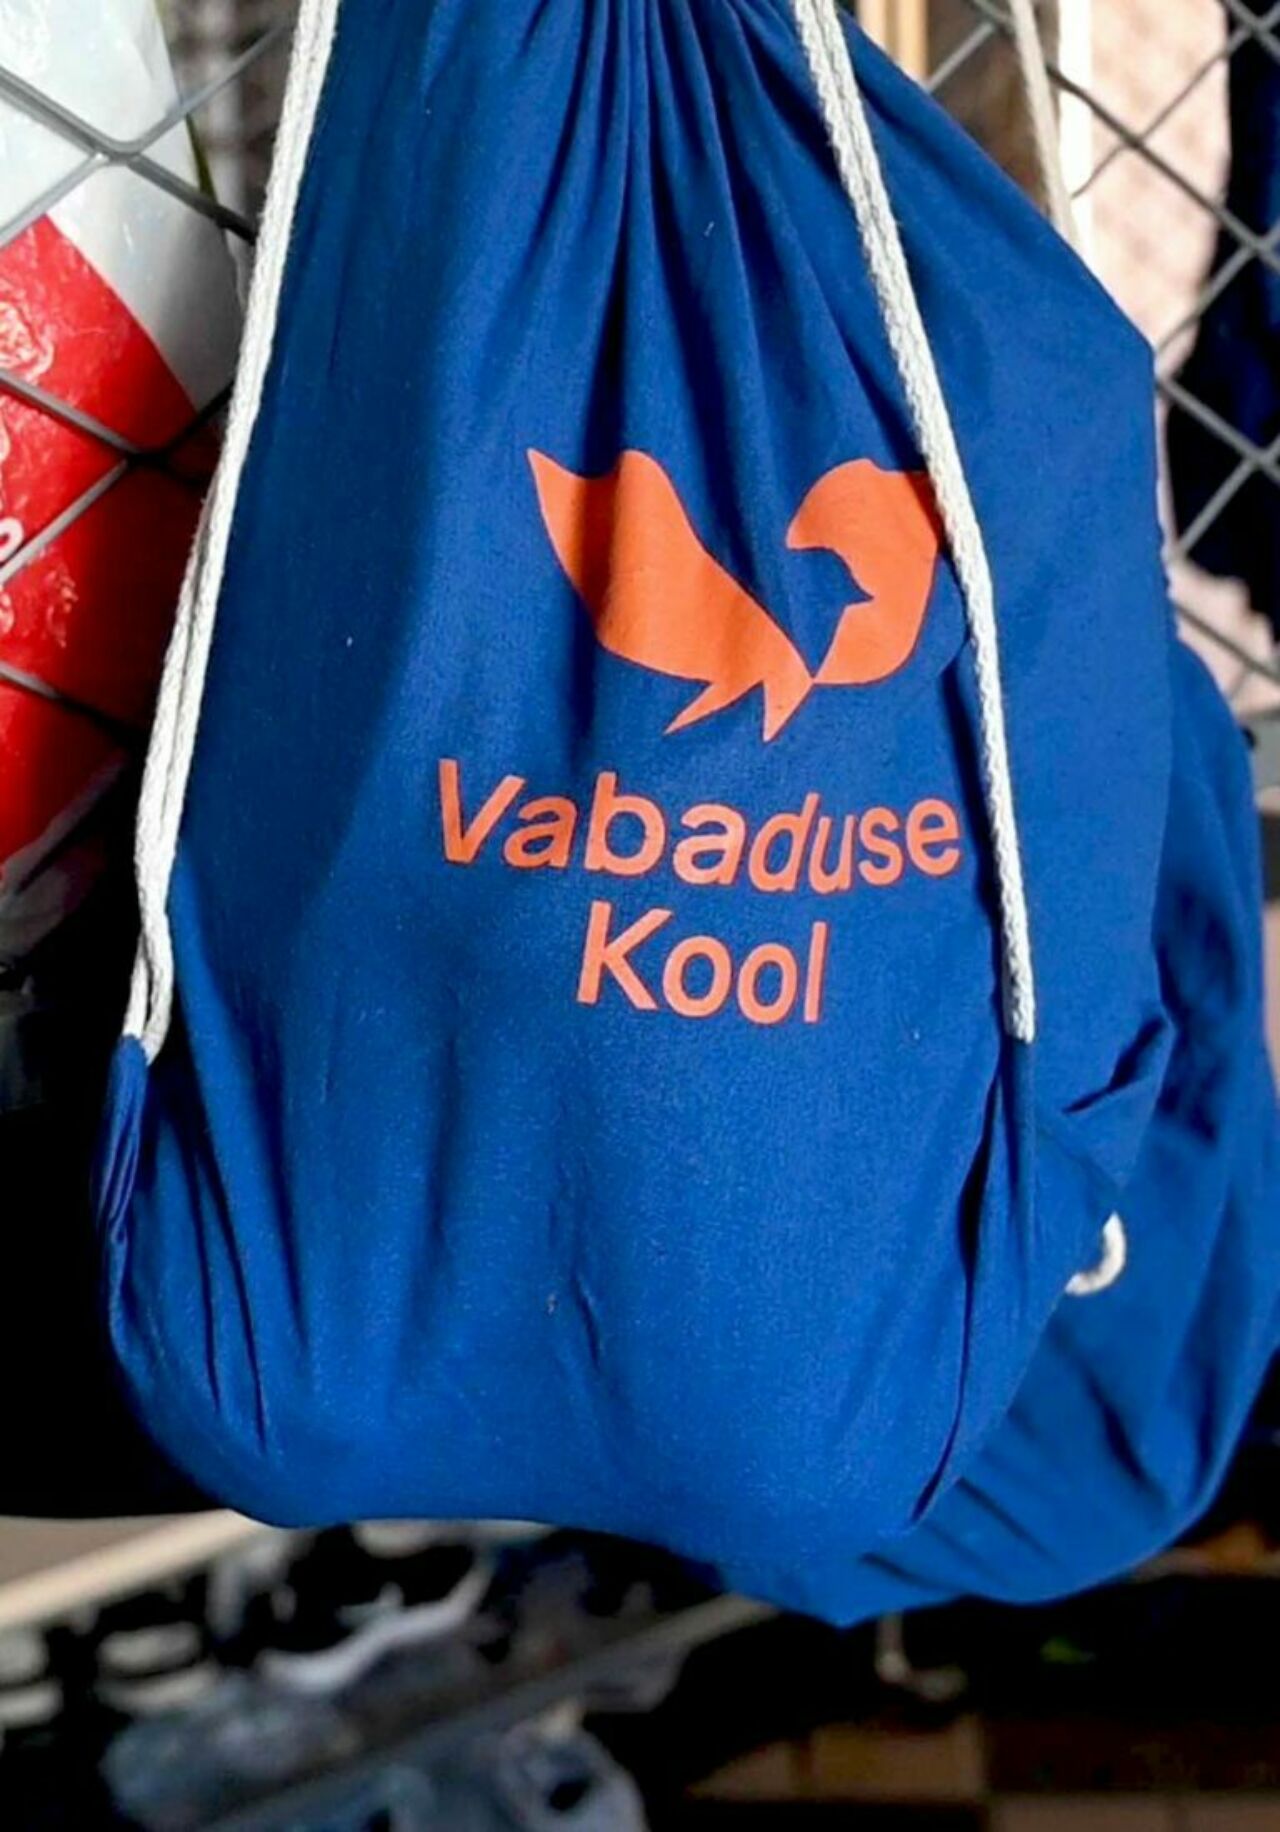 Blue drawstring bag with orange graphic and lettering.